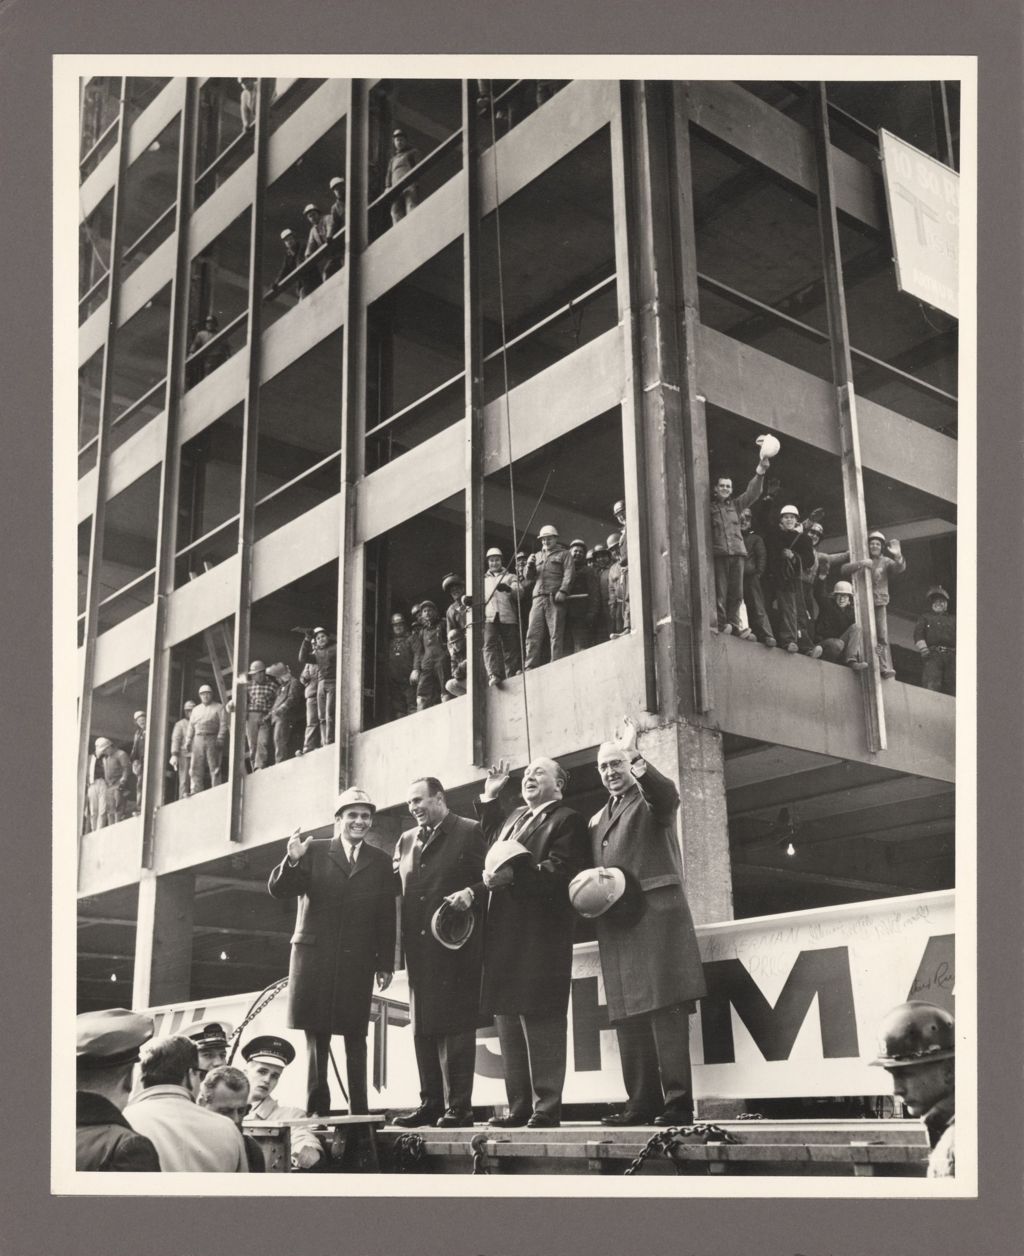 Richard J. Daley at a building construction site event